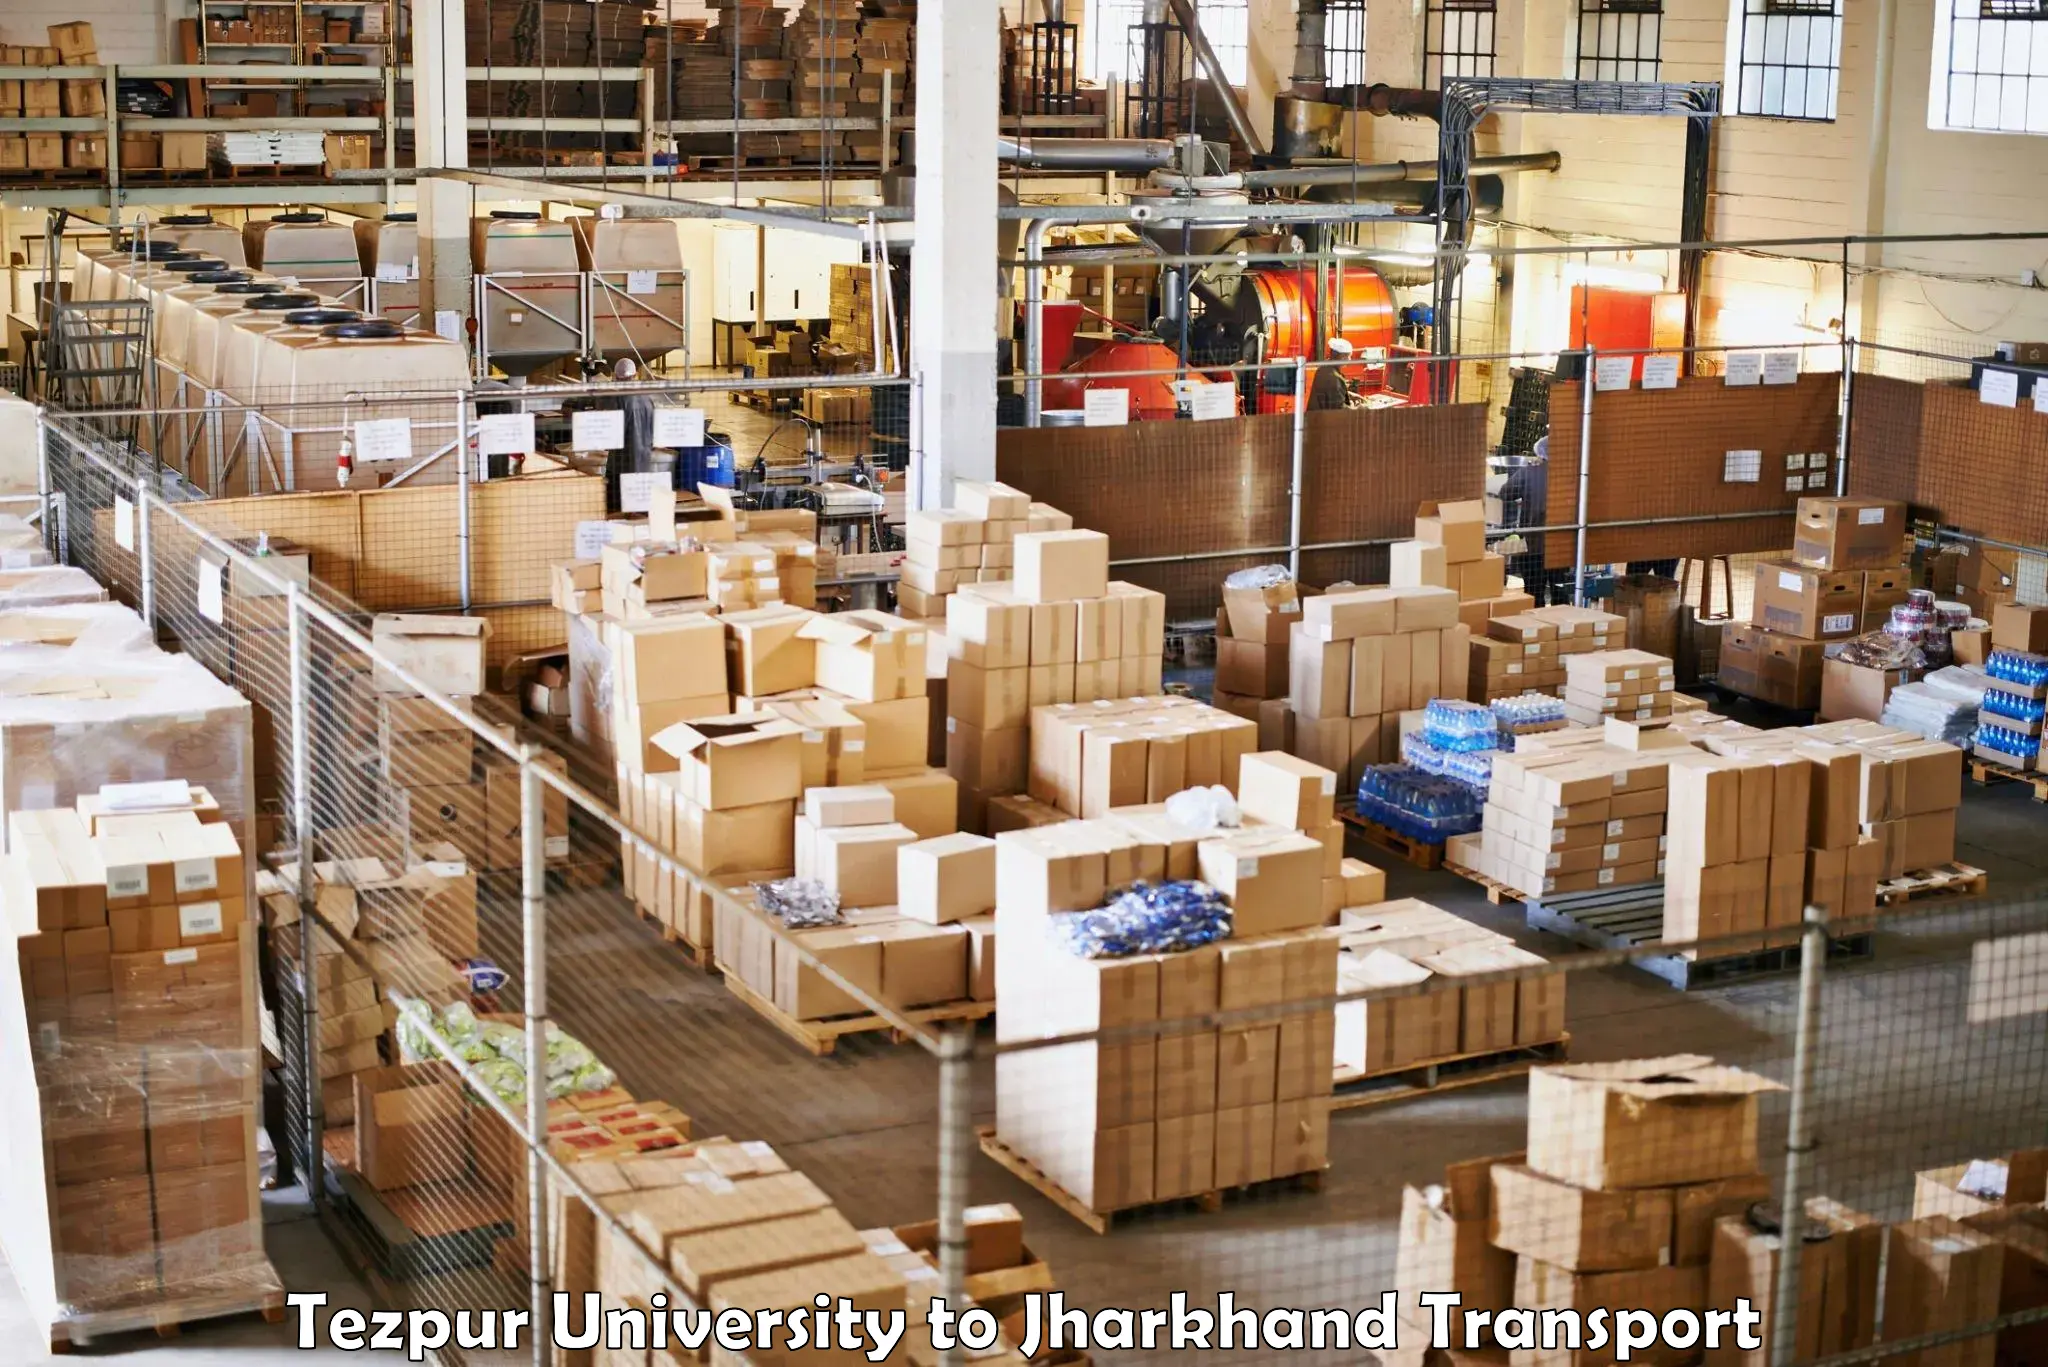 Road transport services in Tezpur University to Dhanbad